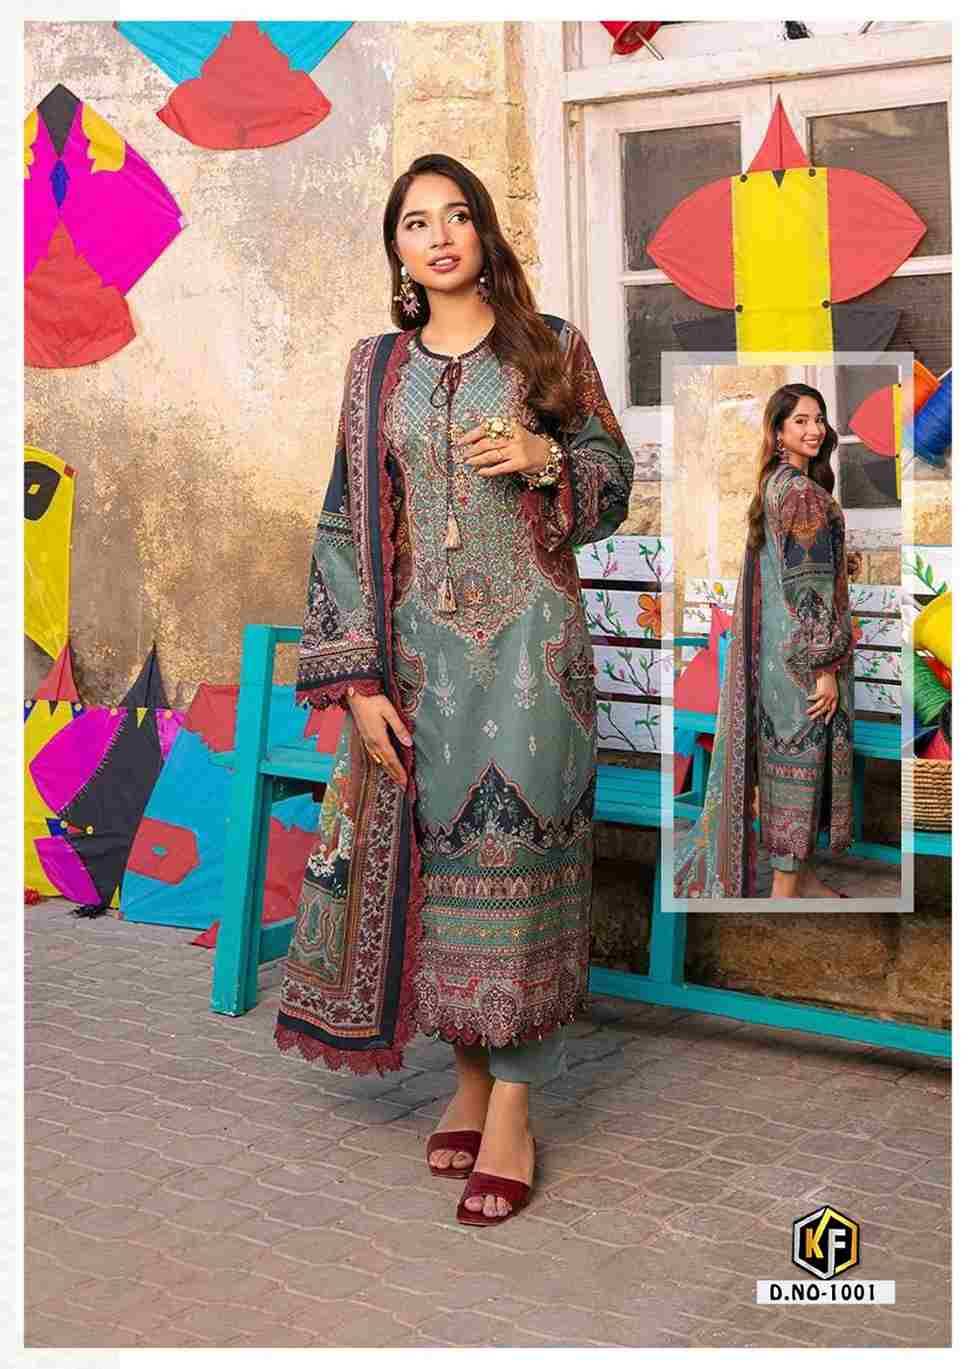 Asim Jofa By Keval Fab 1001 To 1006 Series Beautiful Festive Suits Colorful Stylish Fancy Casual Wear & Ethnic Wear Heavy Cotton Print Dresses At Wholesale Price